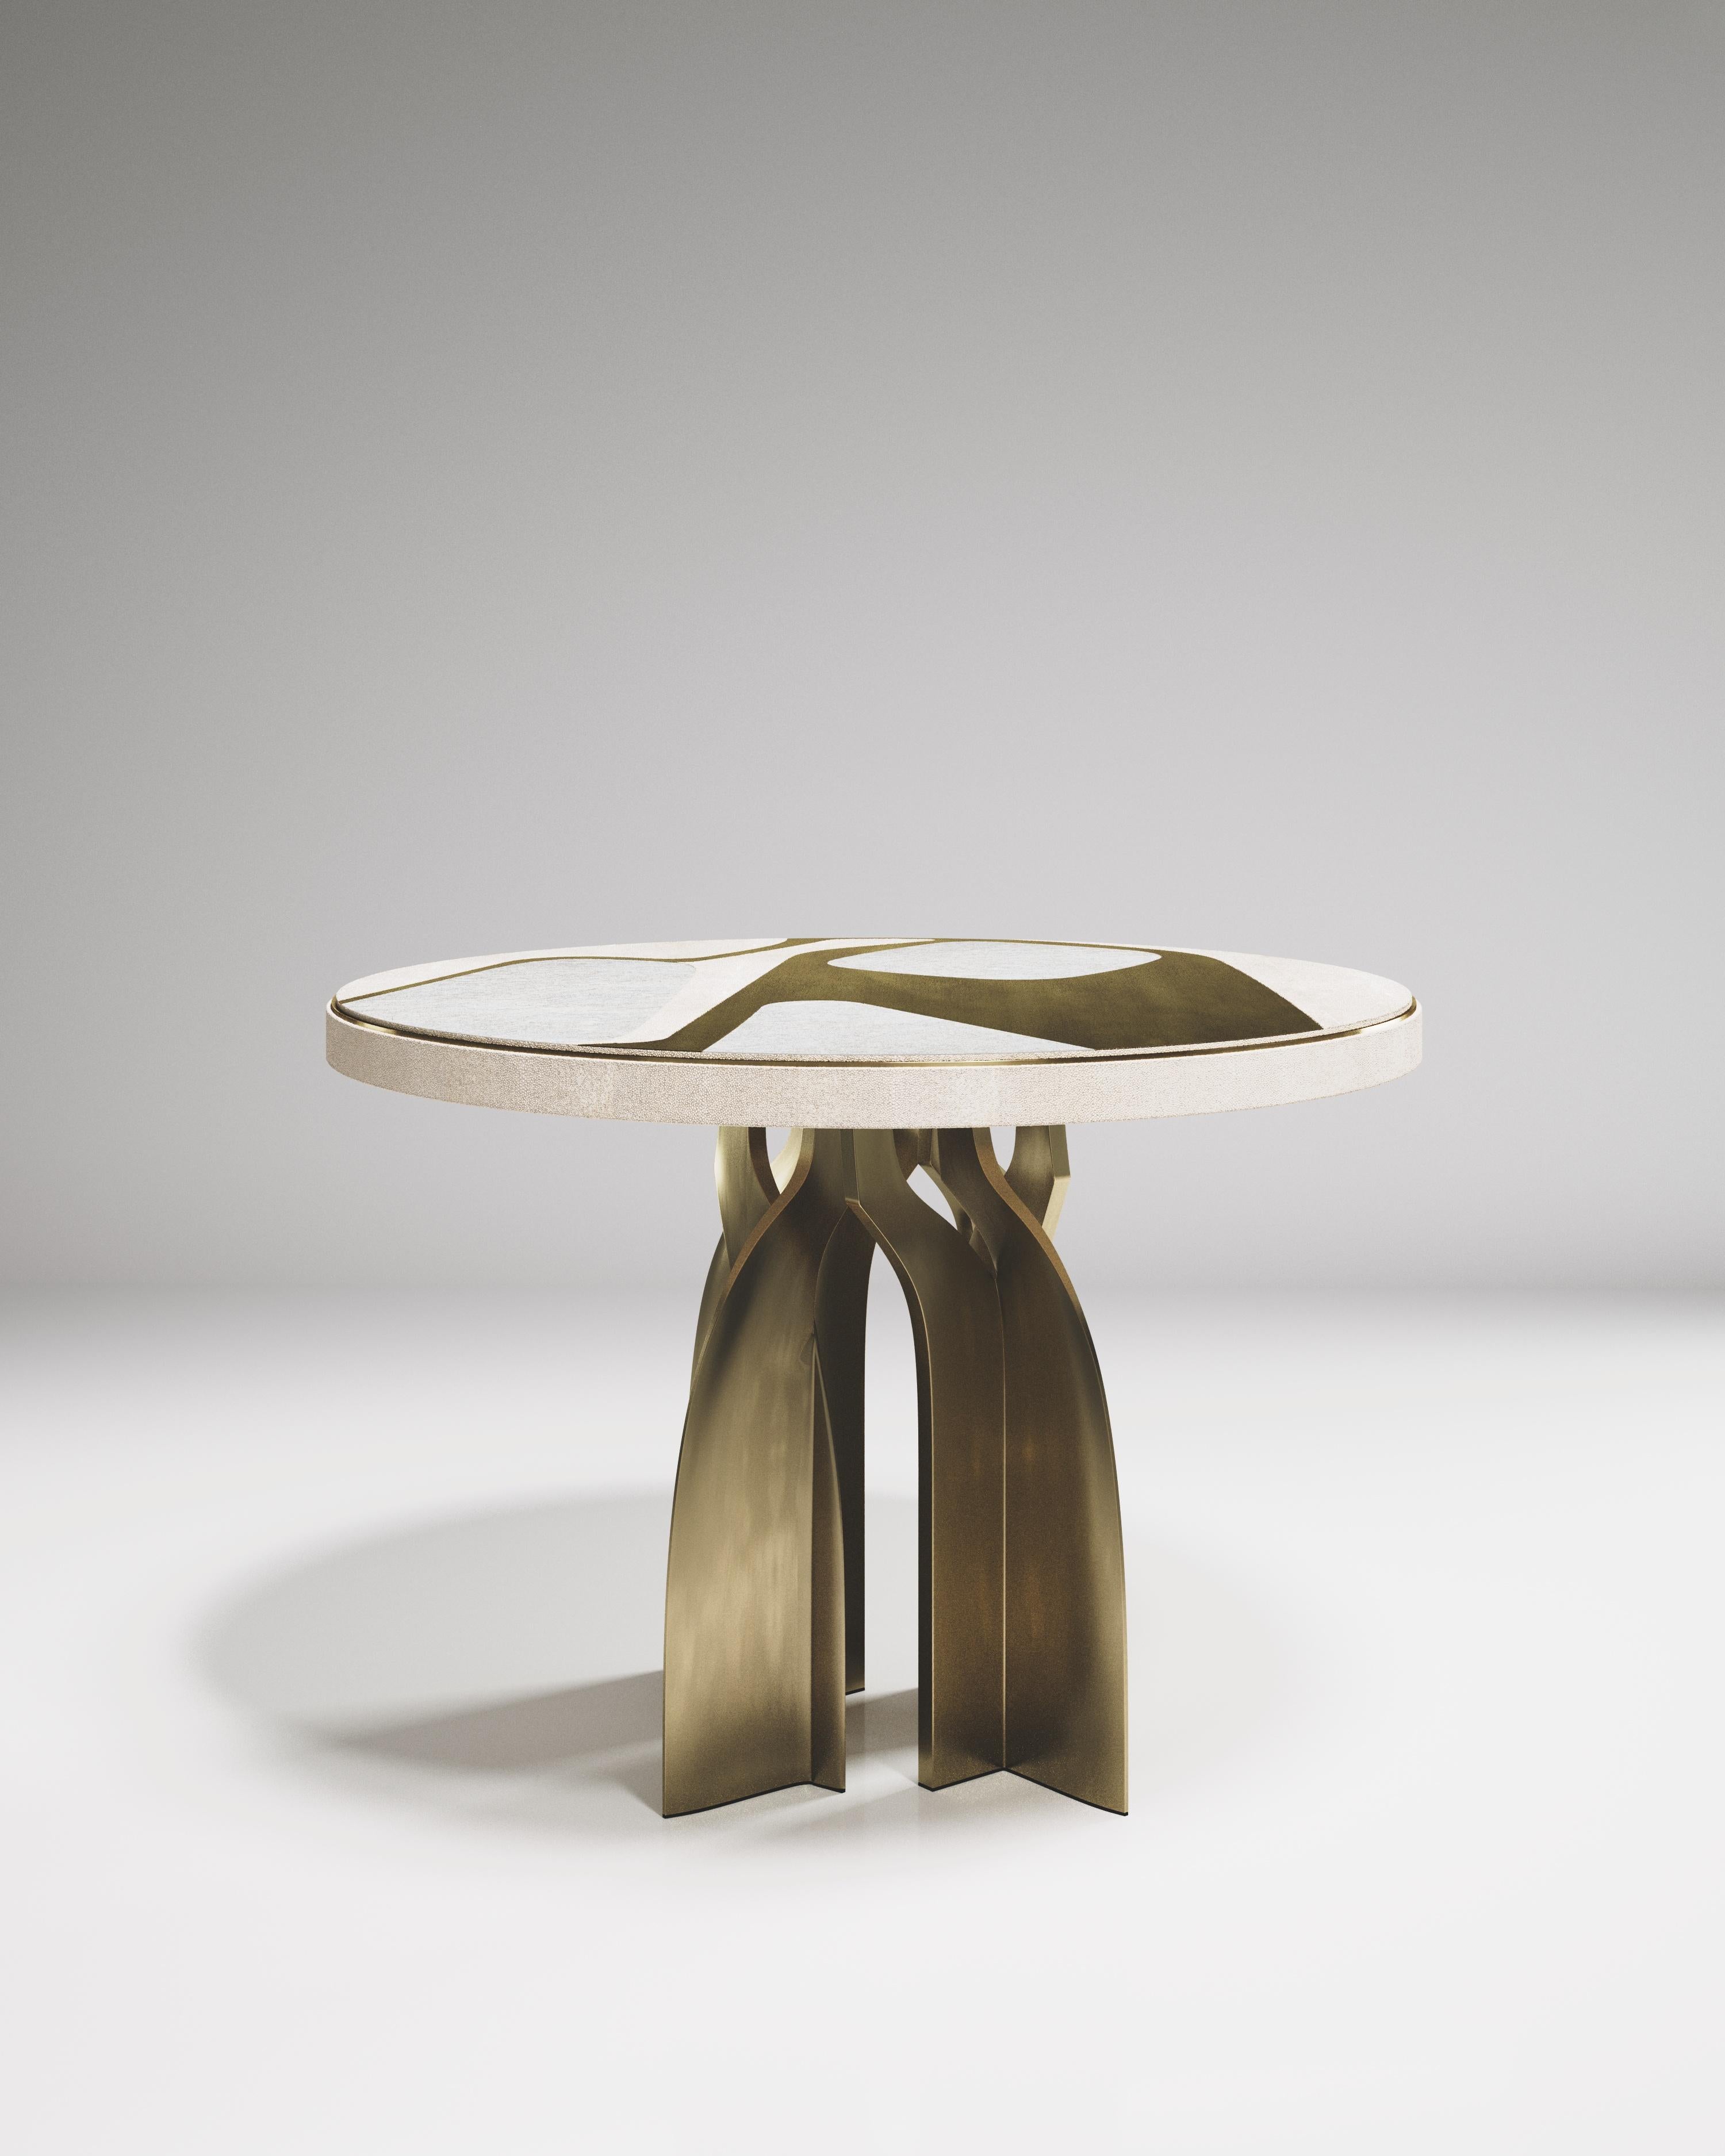 The Chital Breakfast table is a stunning piece, a statement in any space. The mix inlay top in cream shagreen, mother of pearl and bronze-patina brass brings another beautiful dimension to showcase the graphic Cosmos pattern designed by R&Y